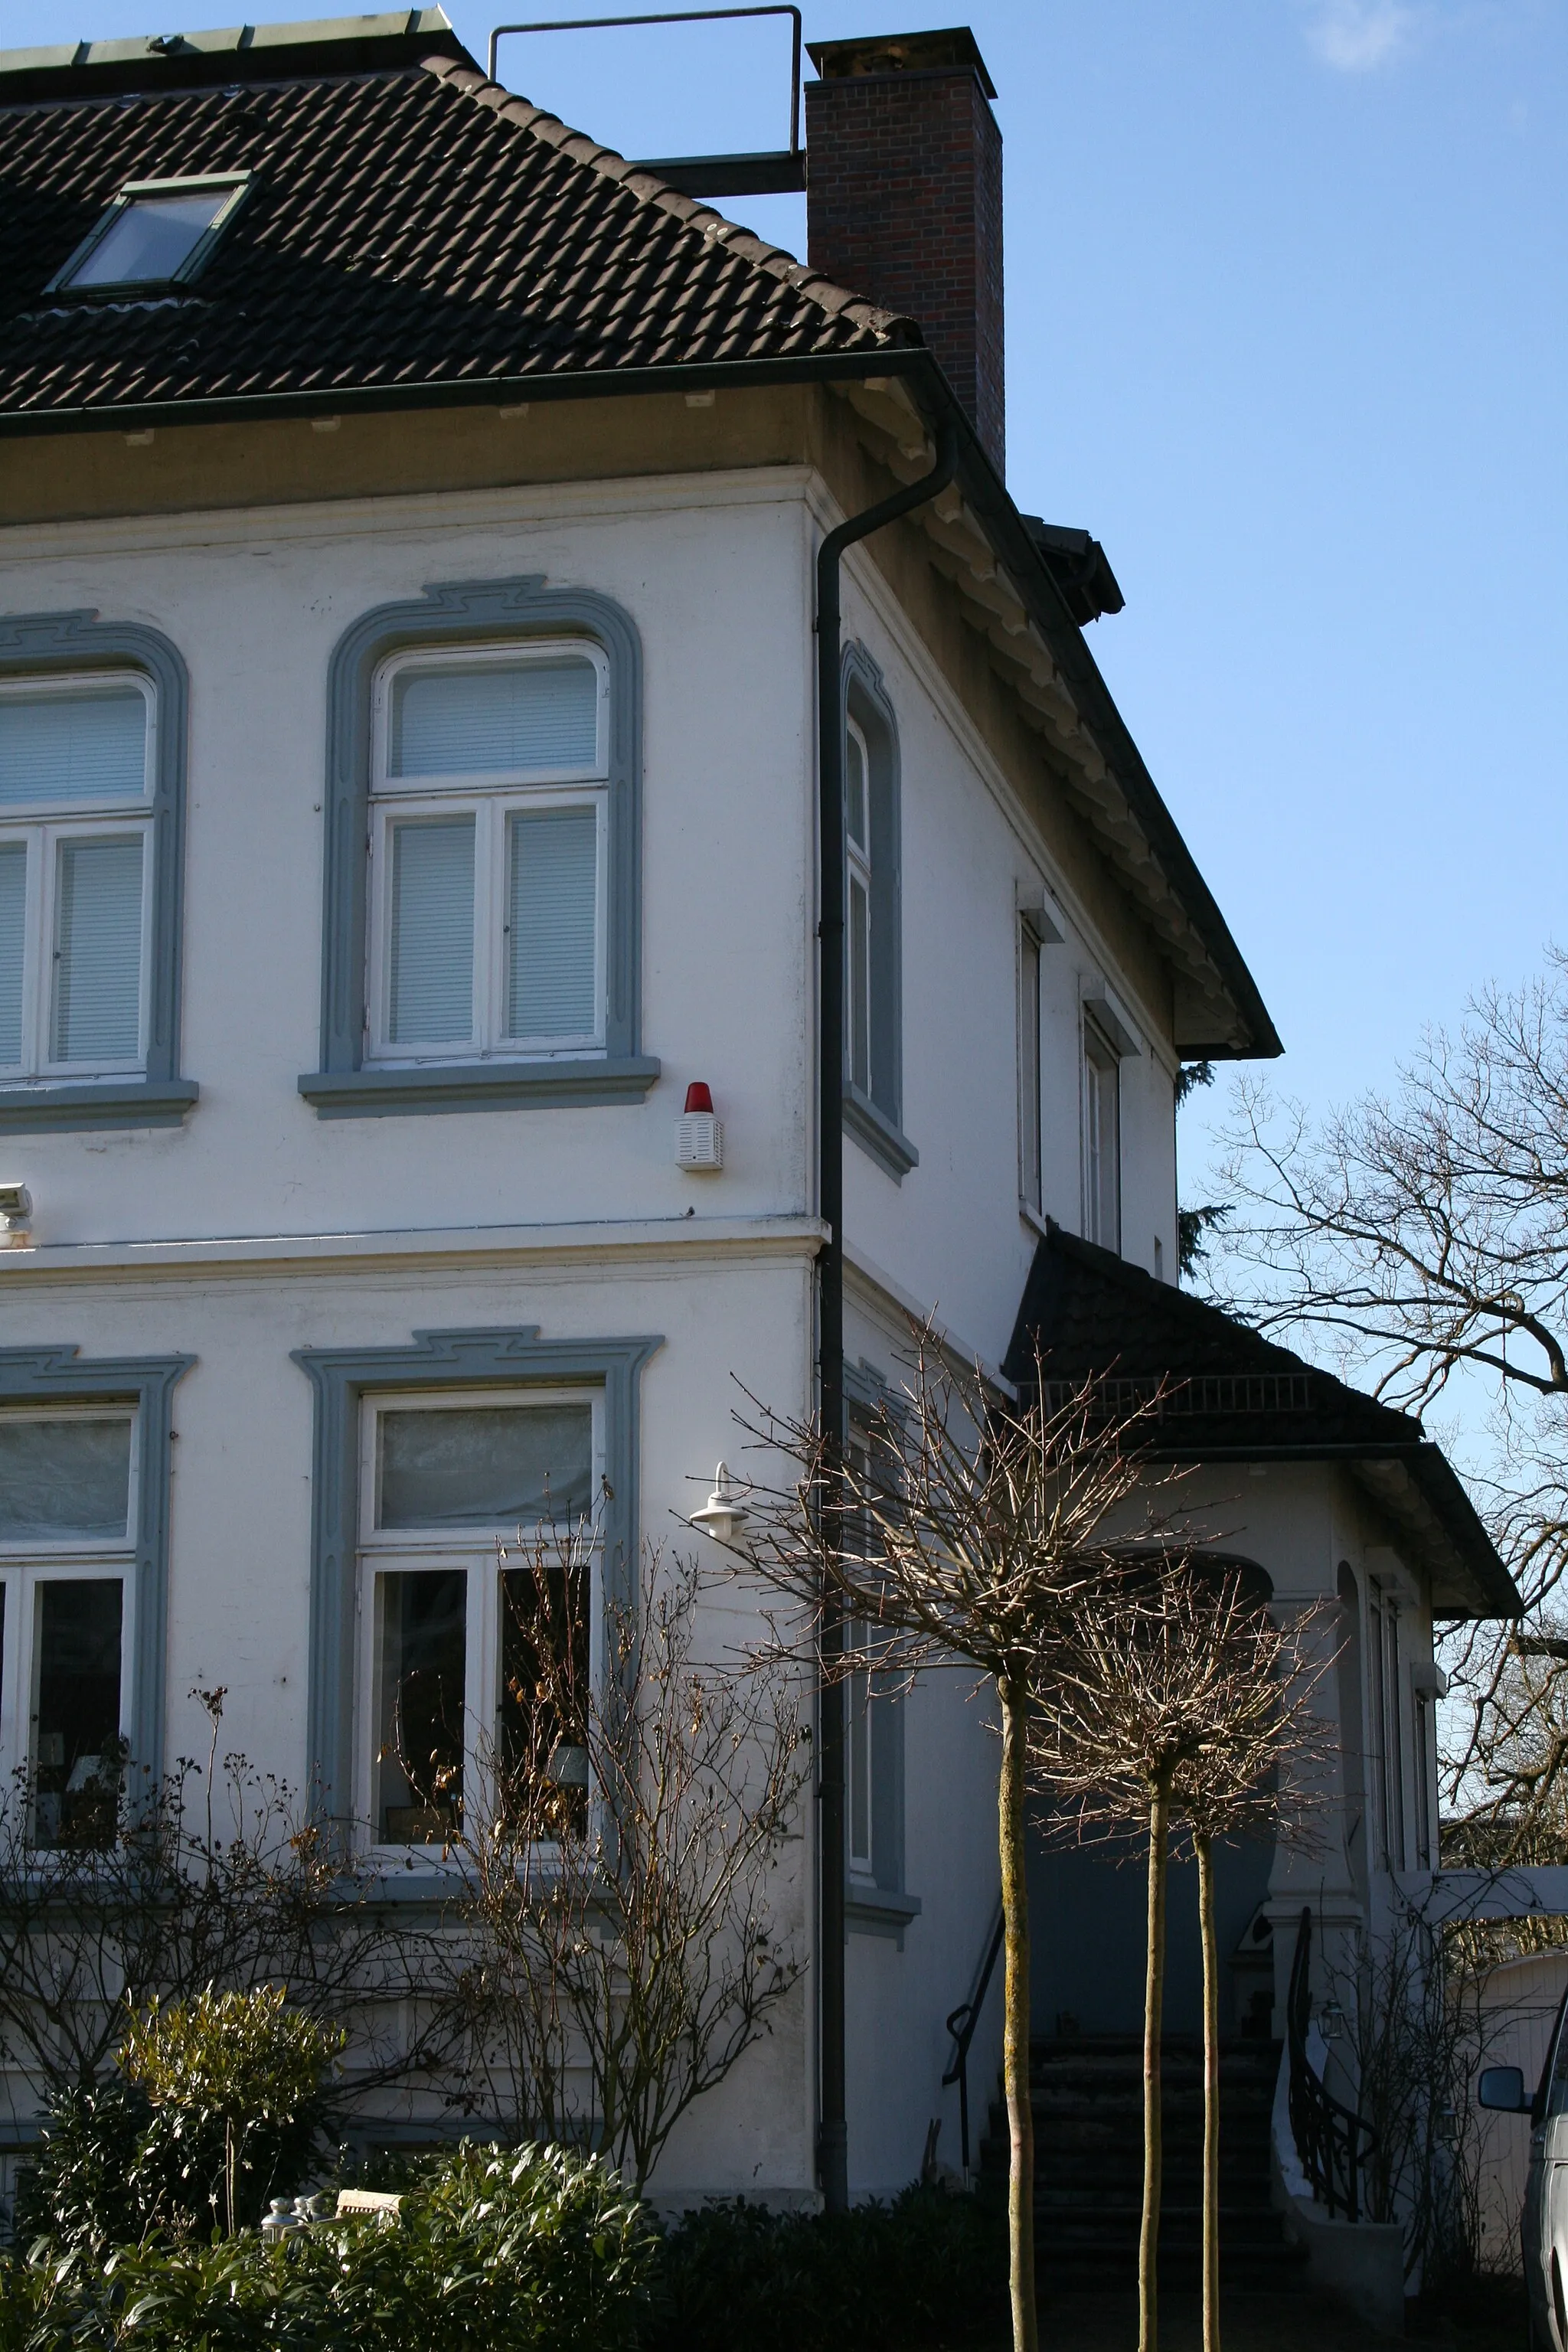 Photo showing: House Pfingstberg 6 in Hamburg-Bergedorf, here lived Dr. Walter Rudolphi, a victim of Nazism. In front of the house there is a Stolperstein for W. Rudolphi.